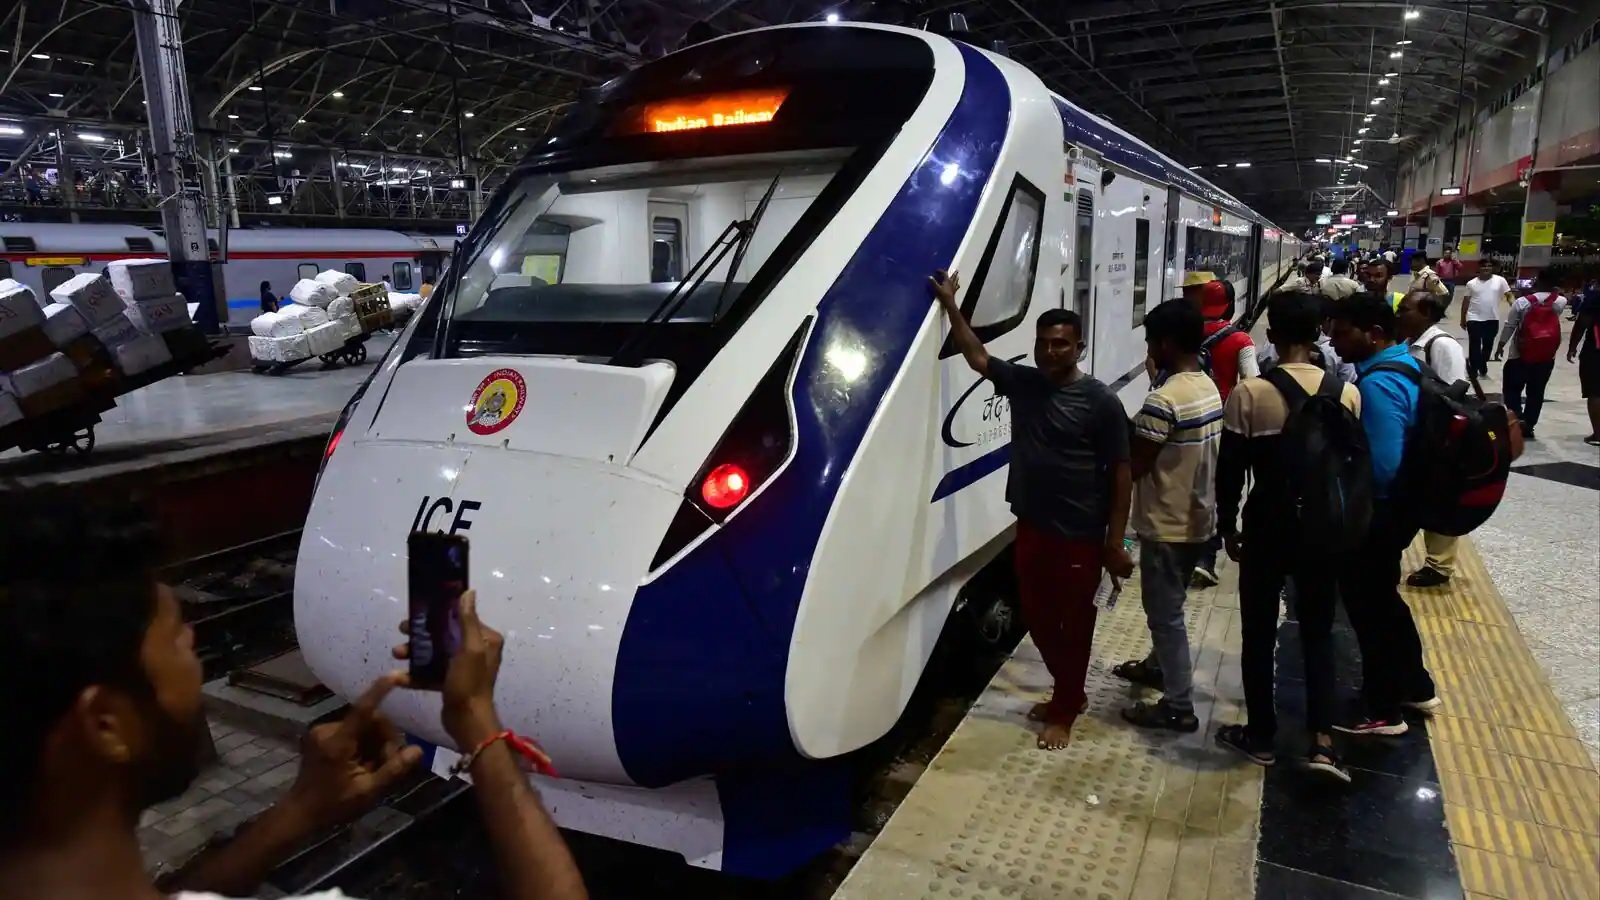 Vande Bharat Express Train: Vande Bharat Express will soon be seen running on this route, Route and time table released